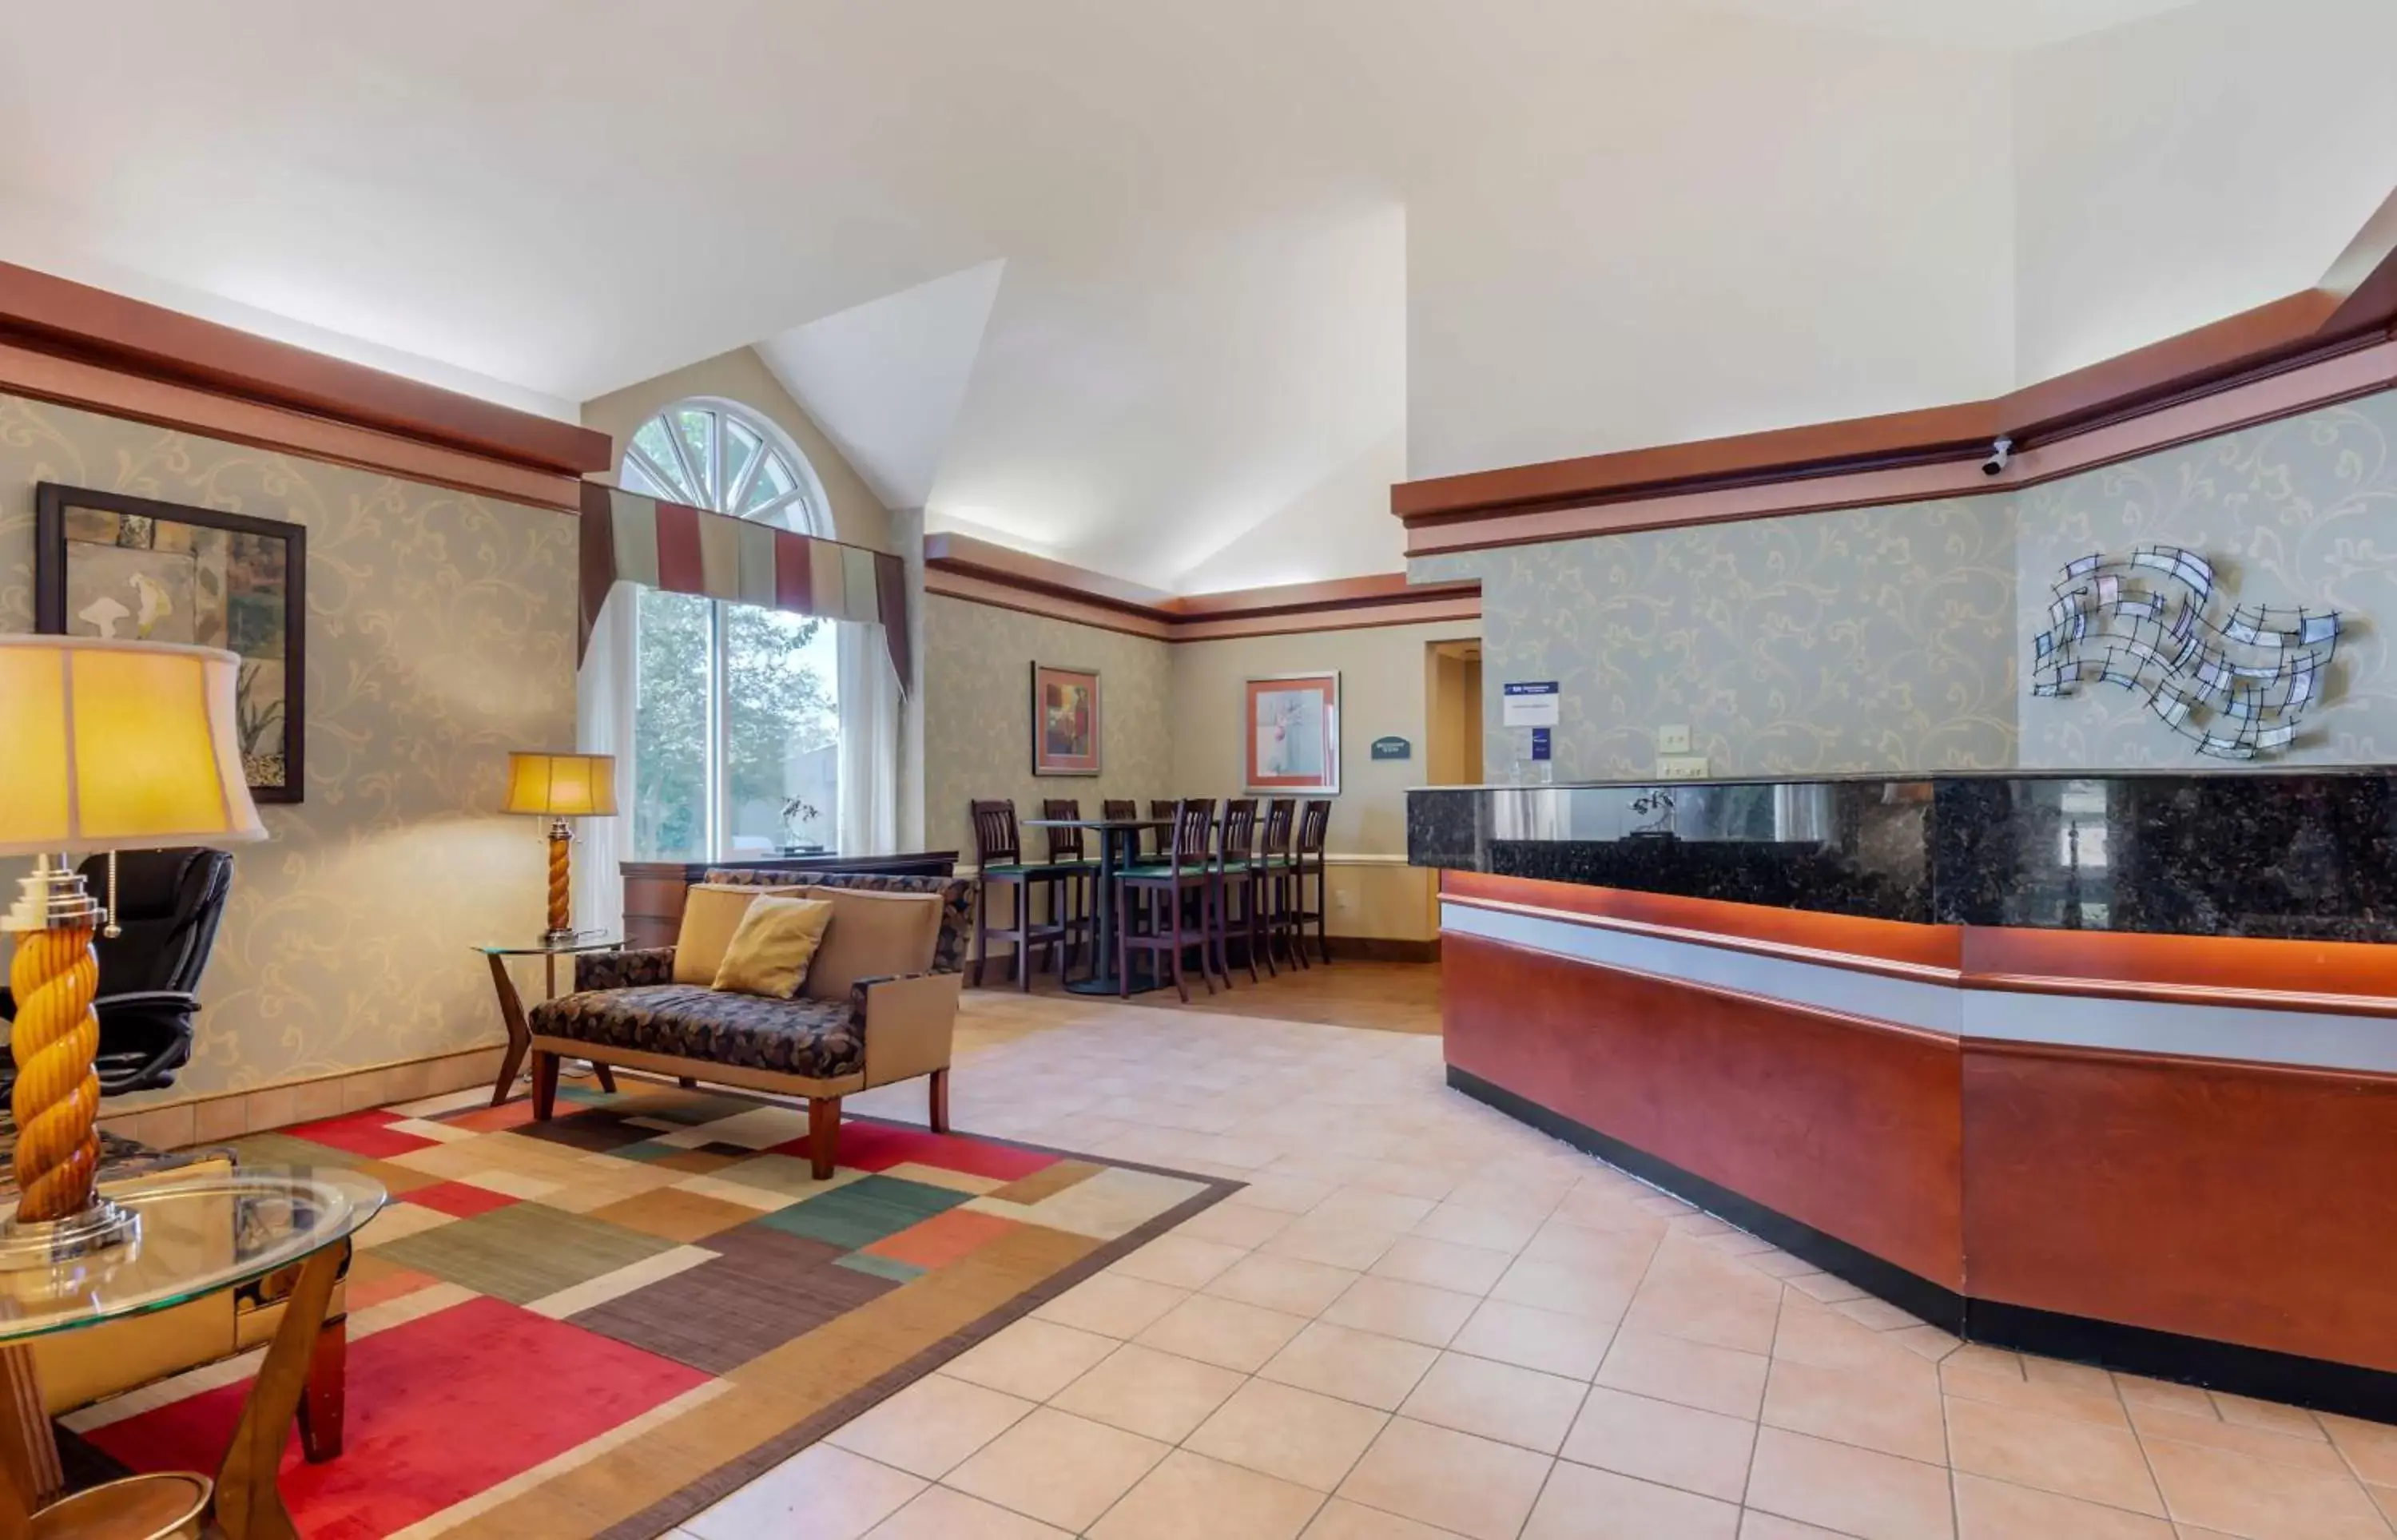 Lobby or reception, Lobby/Reception in BEST WESTERN PLUS Inn at Valley View